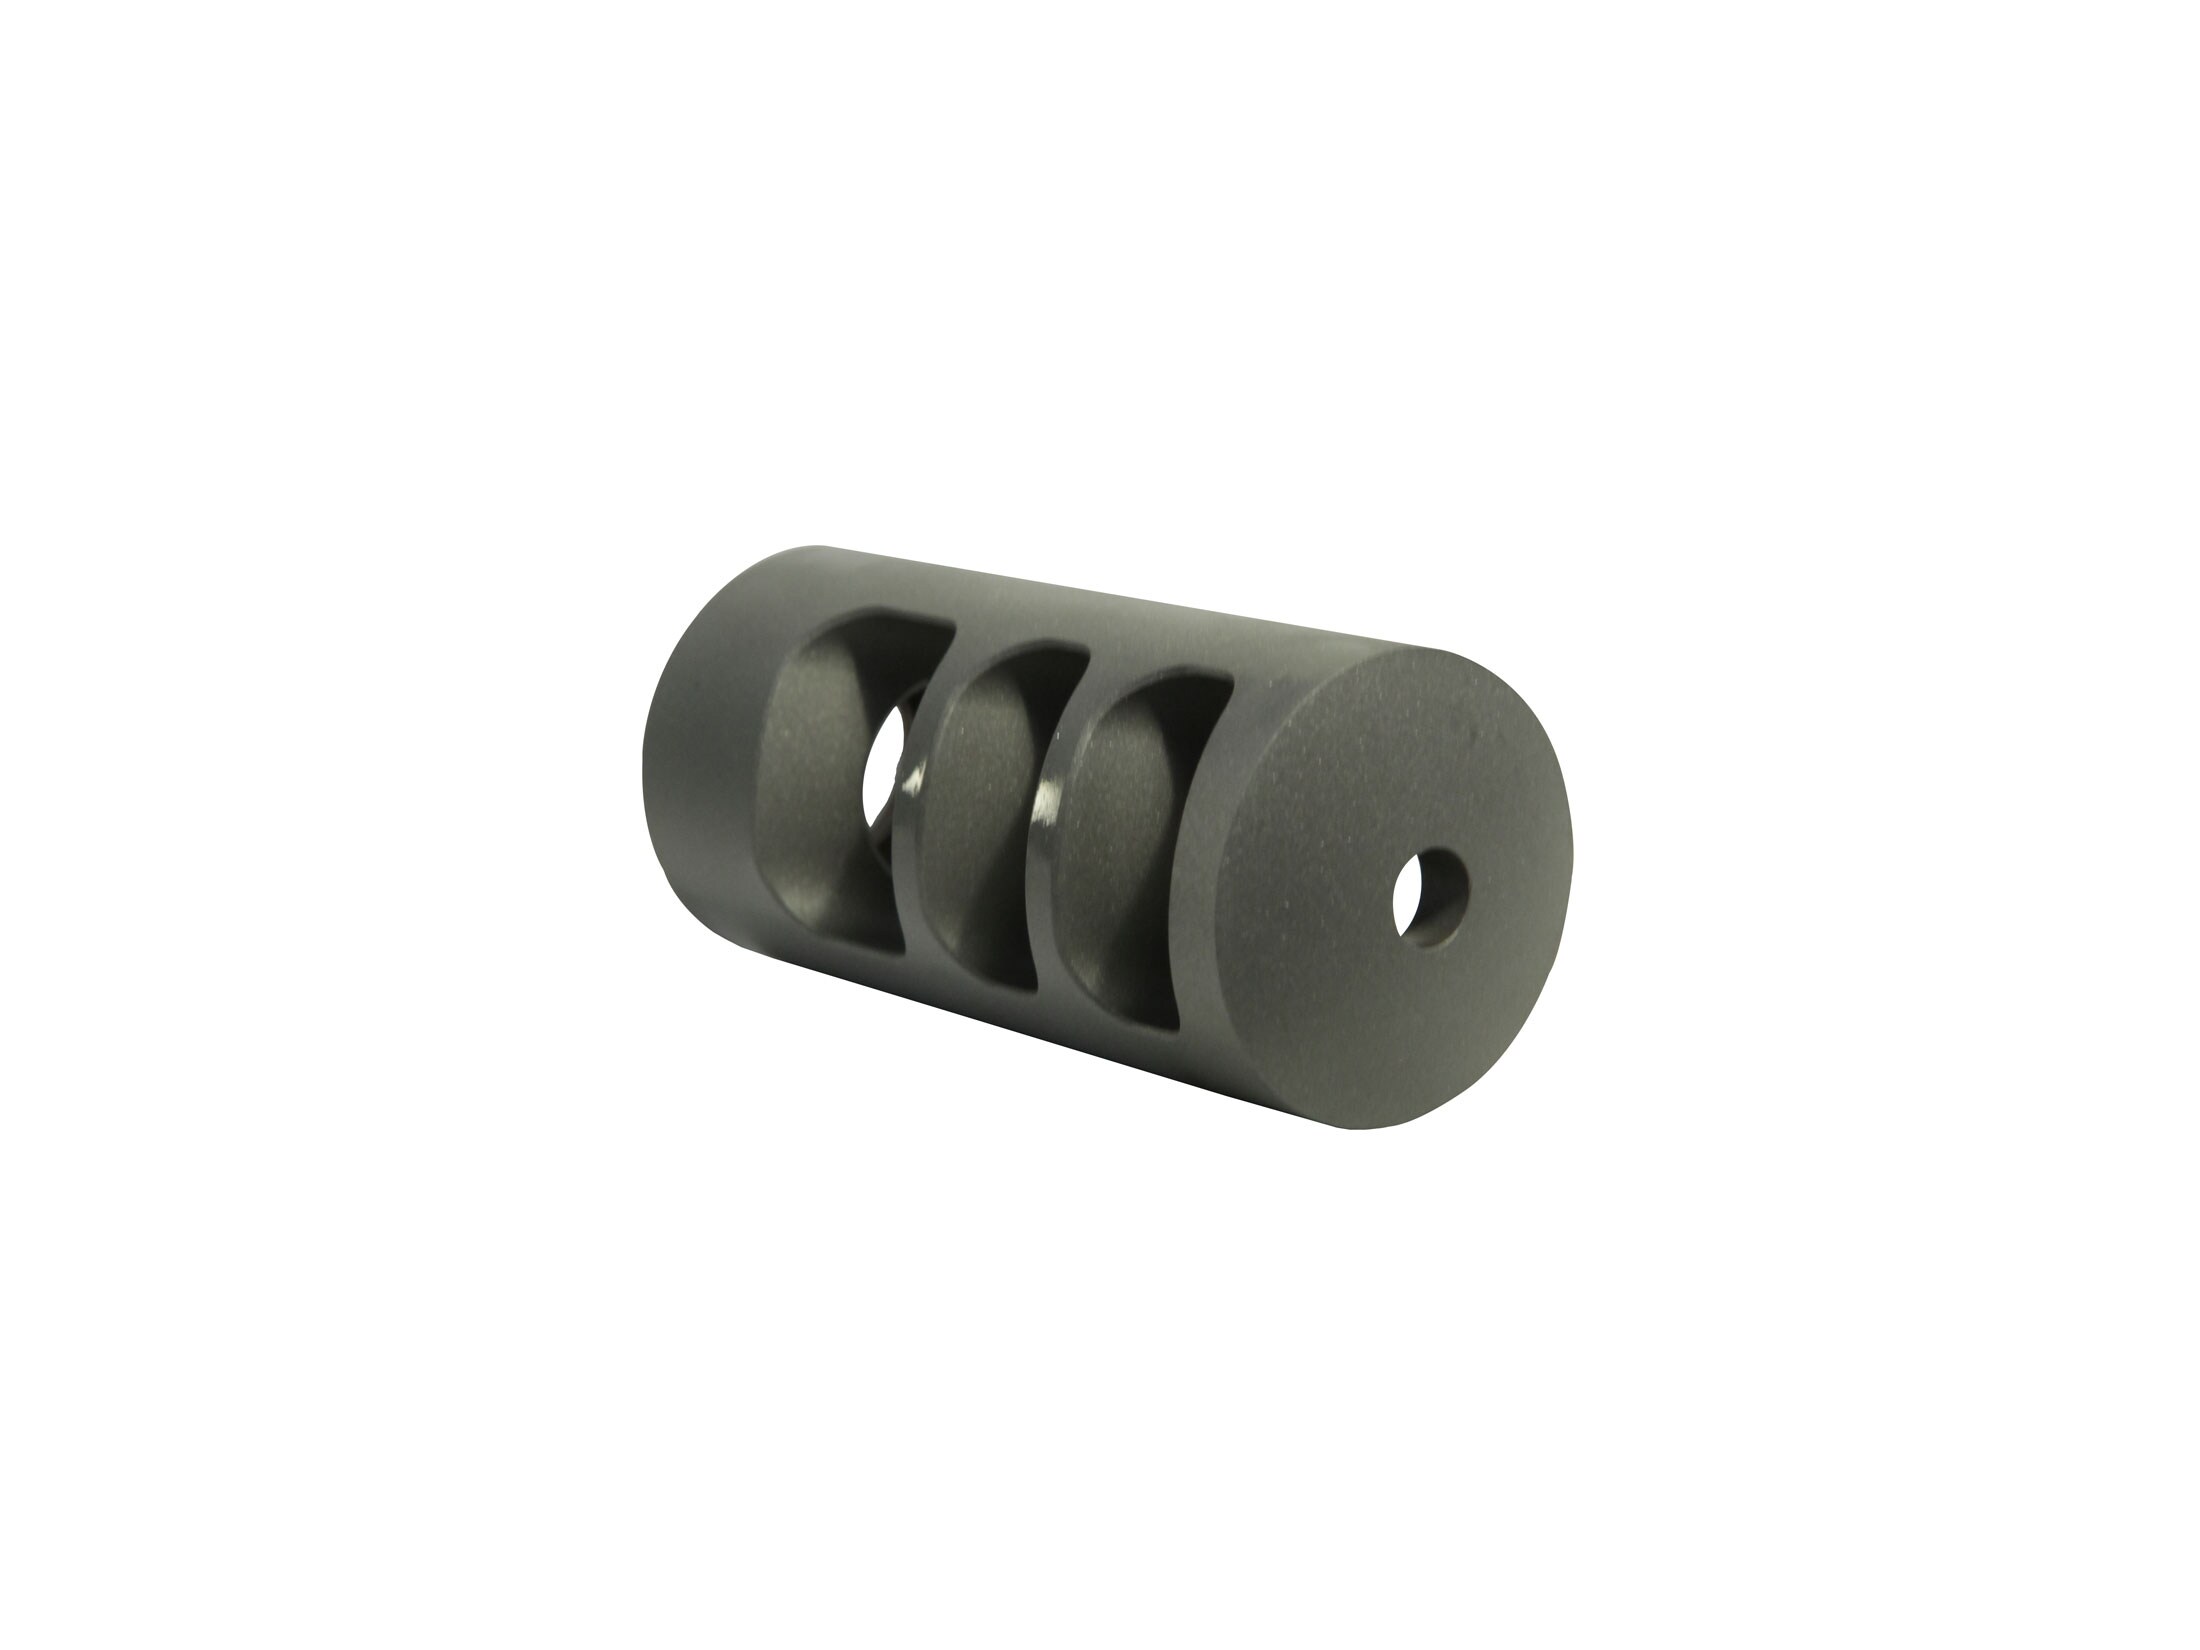 THREADED BOTH ENDS ALUMINUM MUZZLE BRAKE BLANKS CNC MACHINED IN THE USA!! 